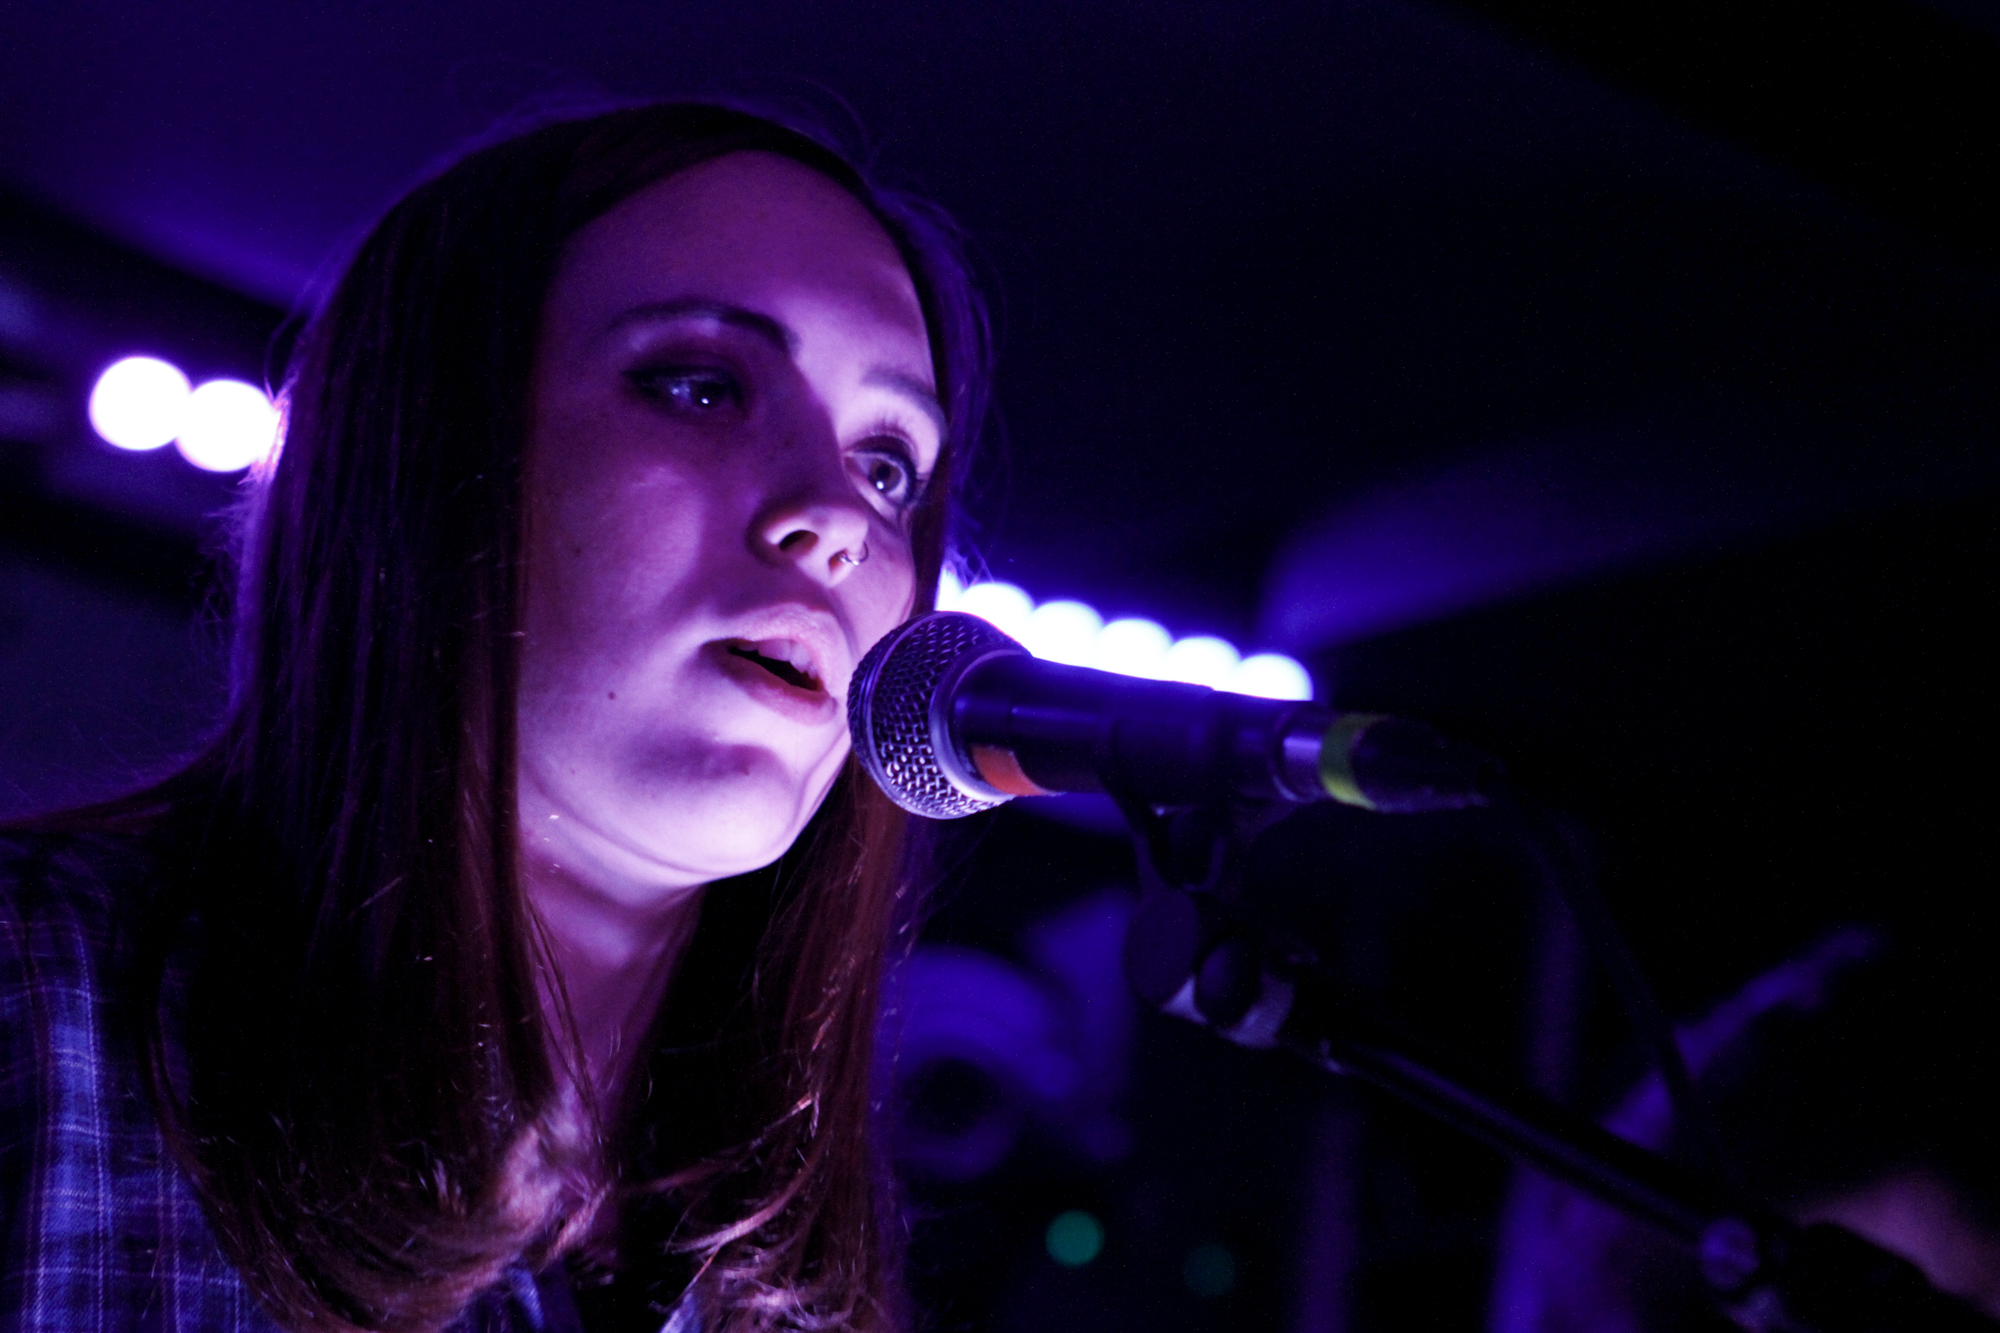 Soccer Mommy plays at Baby's All Right in Williamsburg, Brooklyn, New York on Nov. 14, 2017. (© Michael Katzif - Do not use or republish without prior consent.)